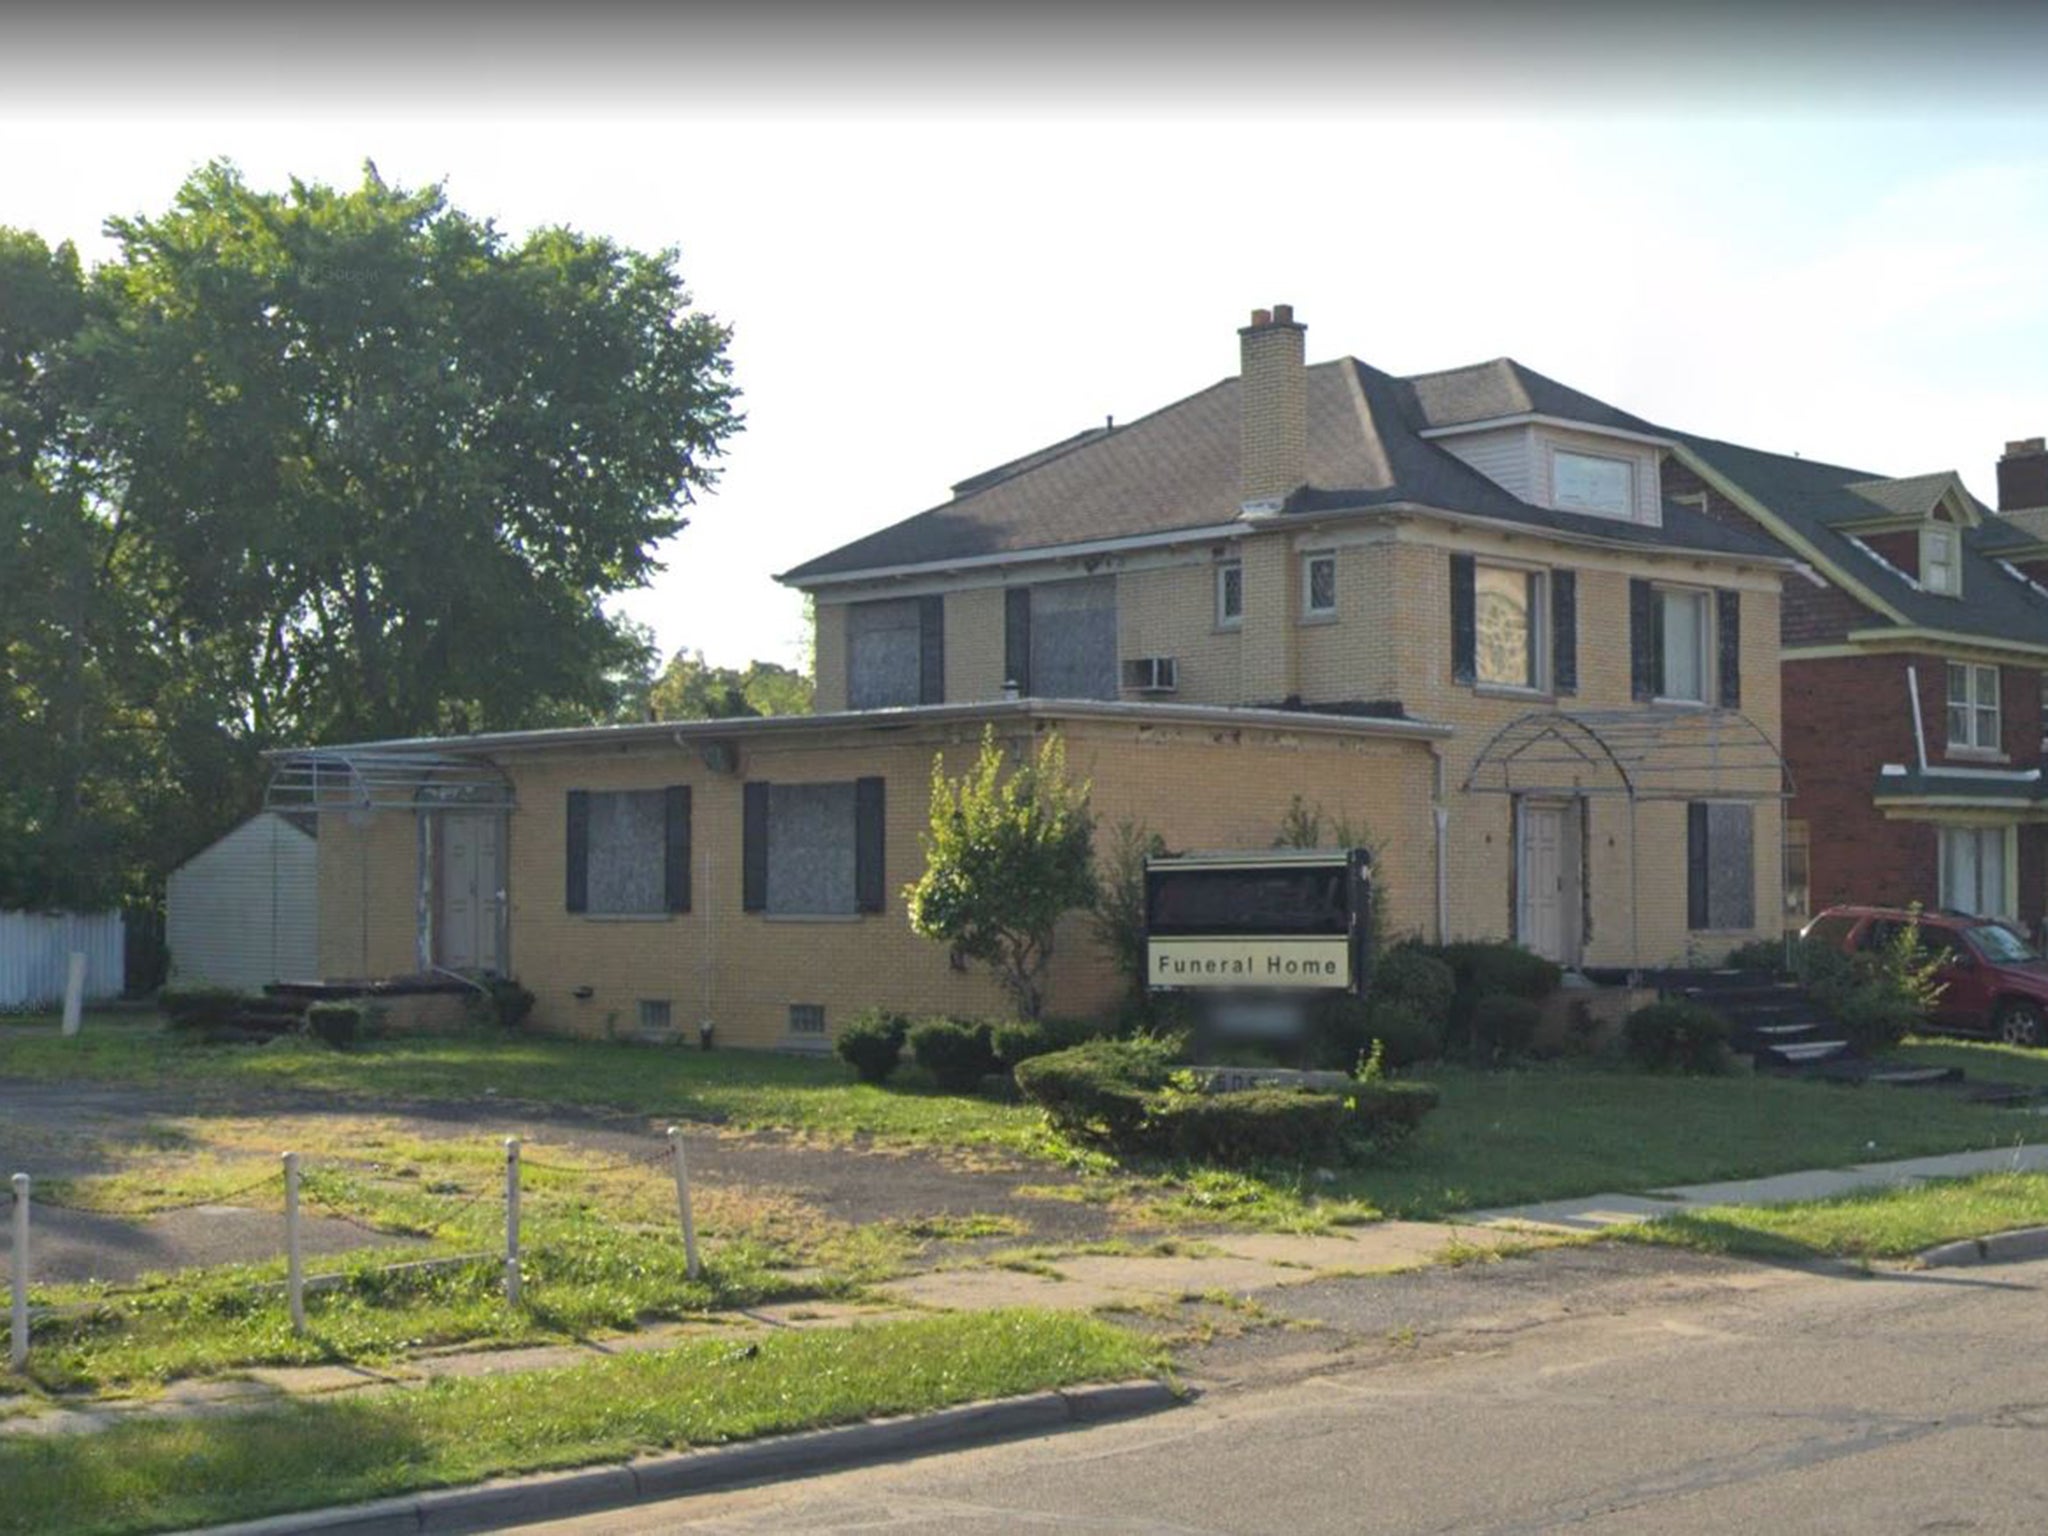 At least seven sets of remains were found in the basement of the former Howell Funeral Home